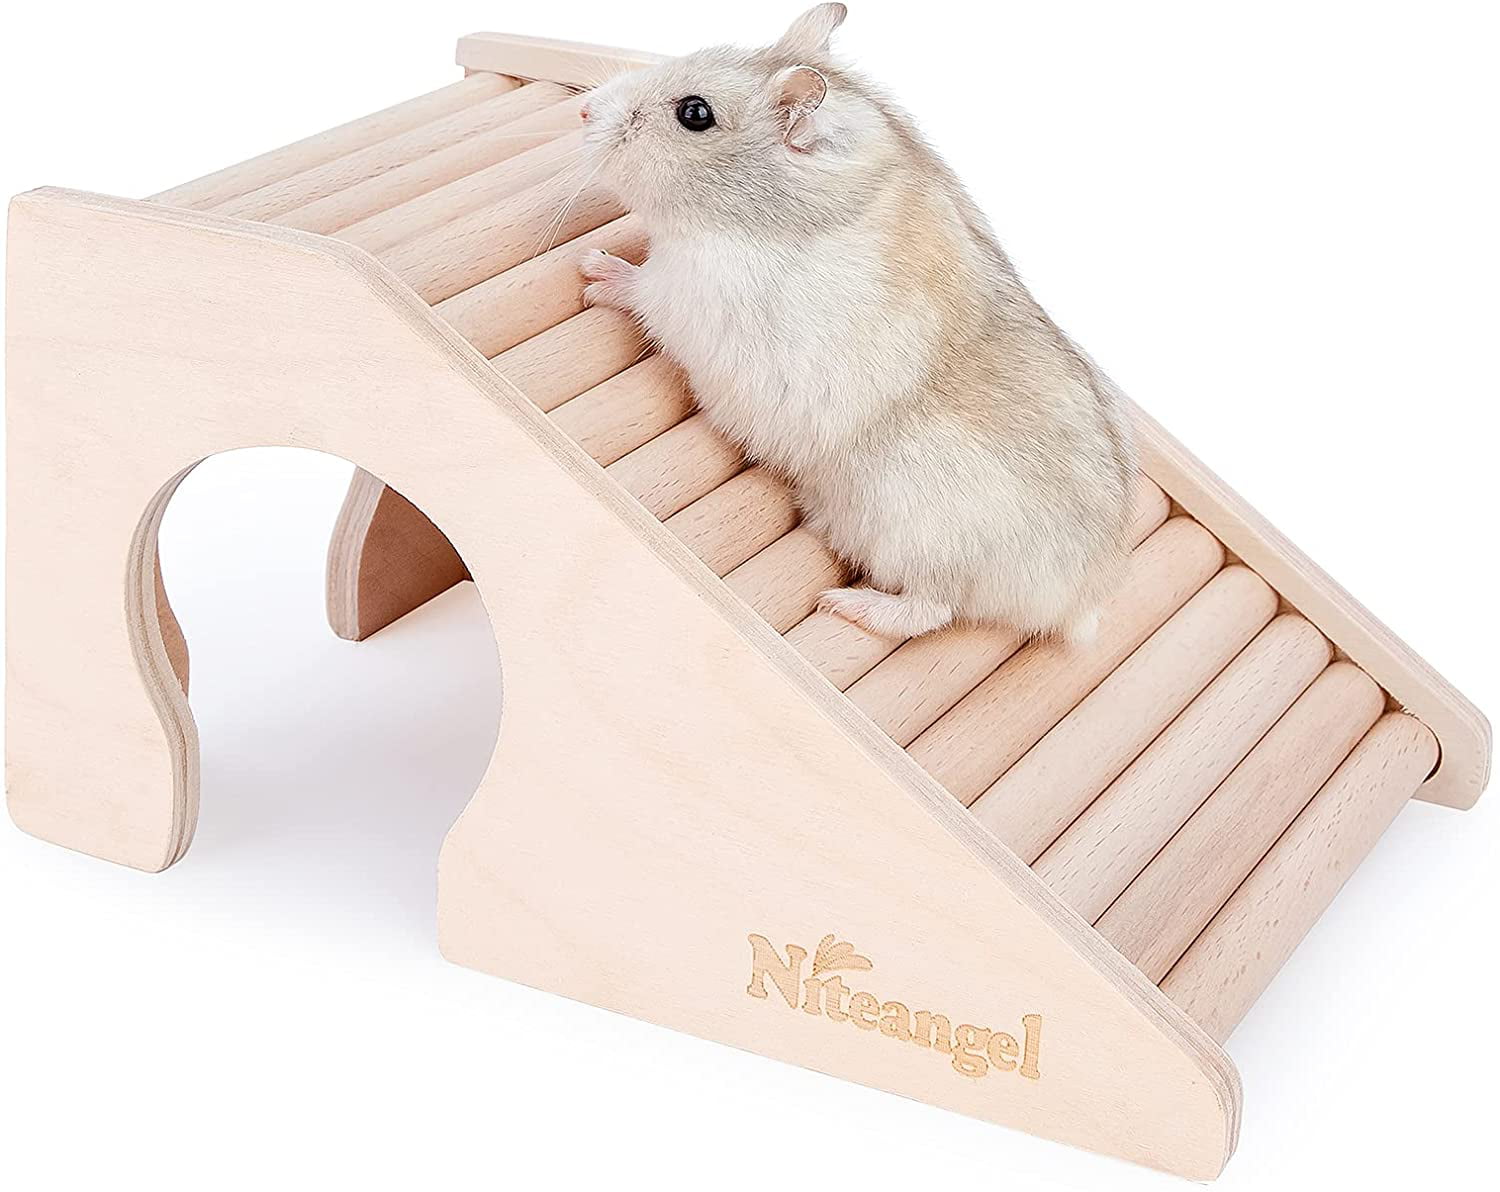 Opening Diameter 2.1 Niteangel Small Hamster Tunnel Toys for Dwarf Hamster Mice Gerbils or Other Small-Sized Hamster 